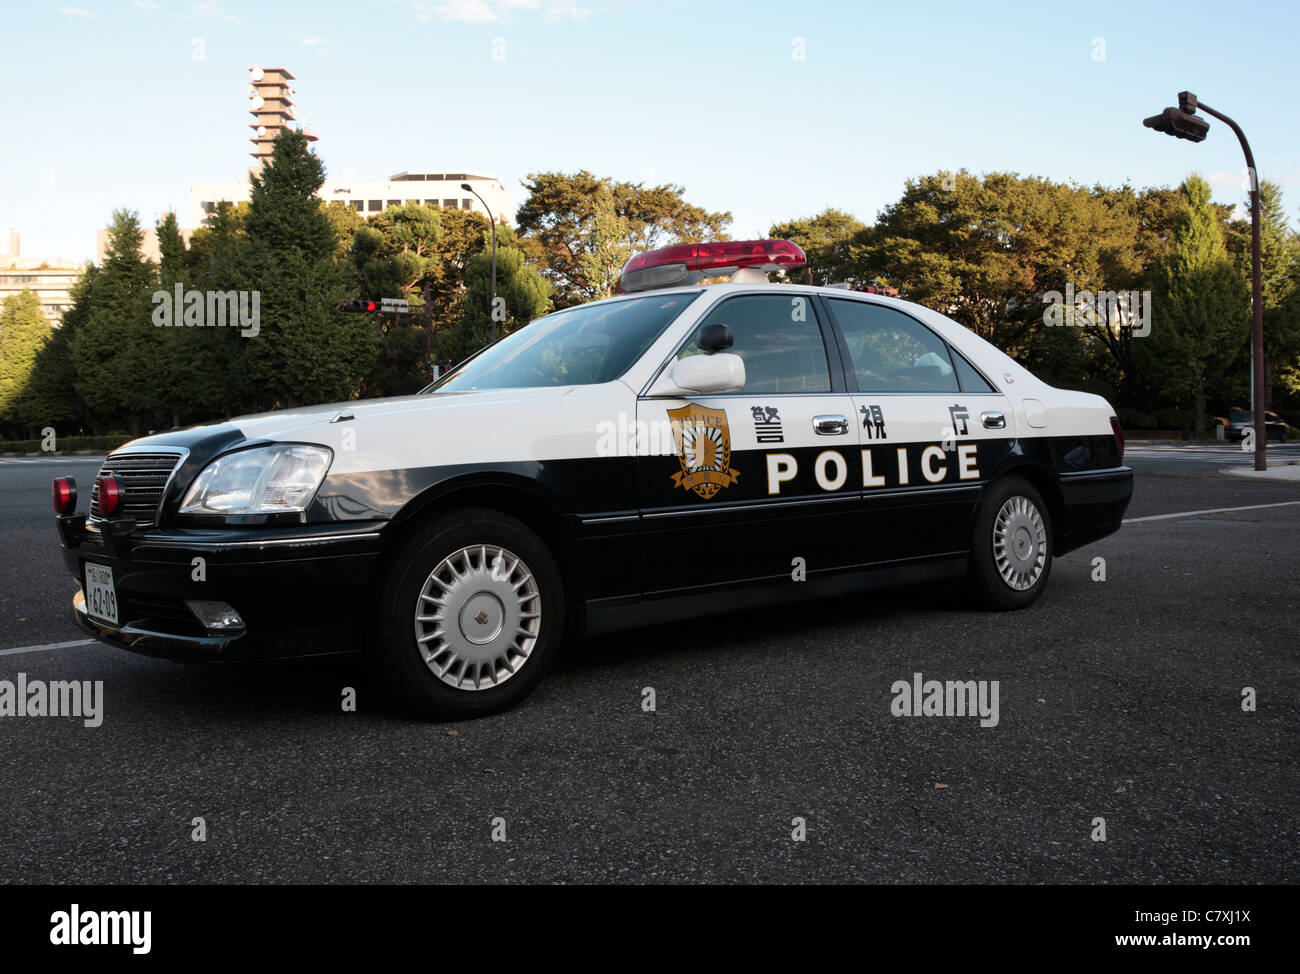 TOKYO - SEPTEMBER 23: Close-up of a Japanese police car on September 23, 2011 in Tokyo. Stock Photo